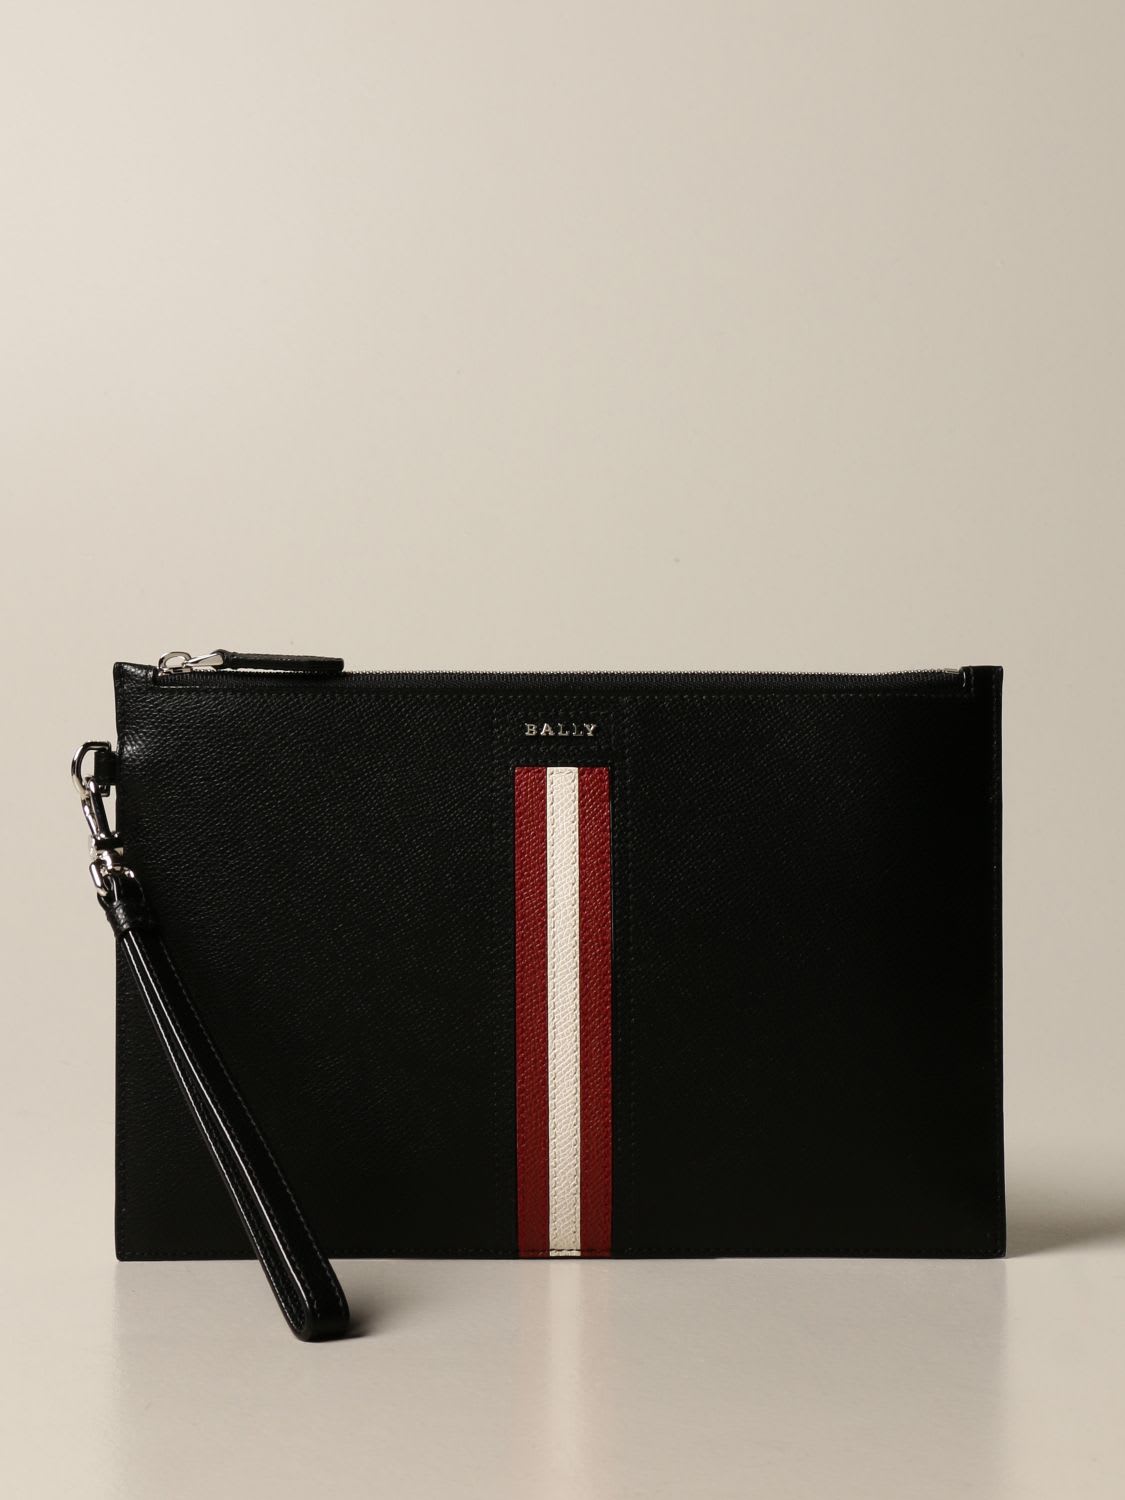 Bally Briefcase Tenery. lt Bally Clutch Bag In Leather With Trainspotting Band